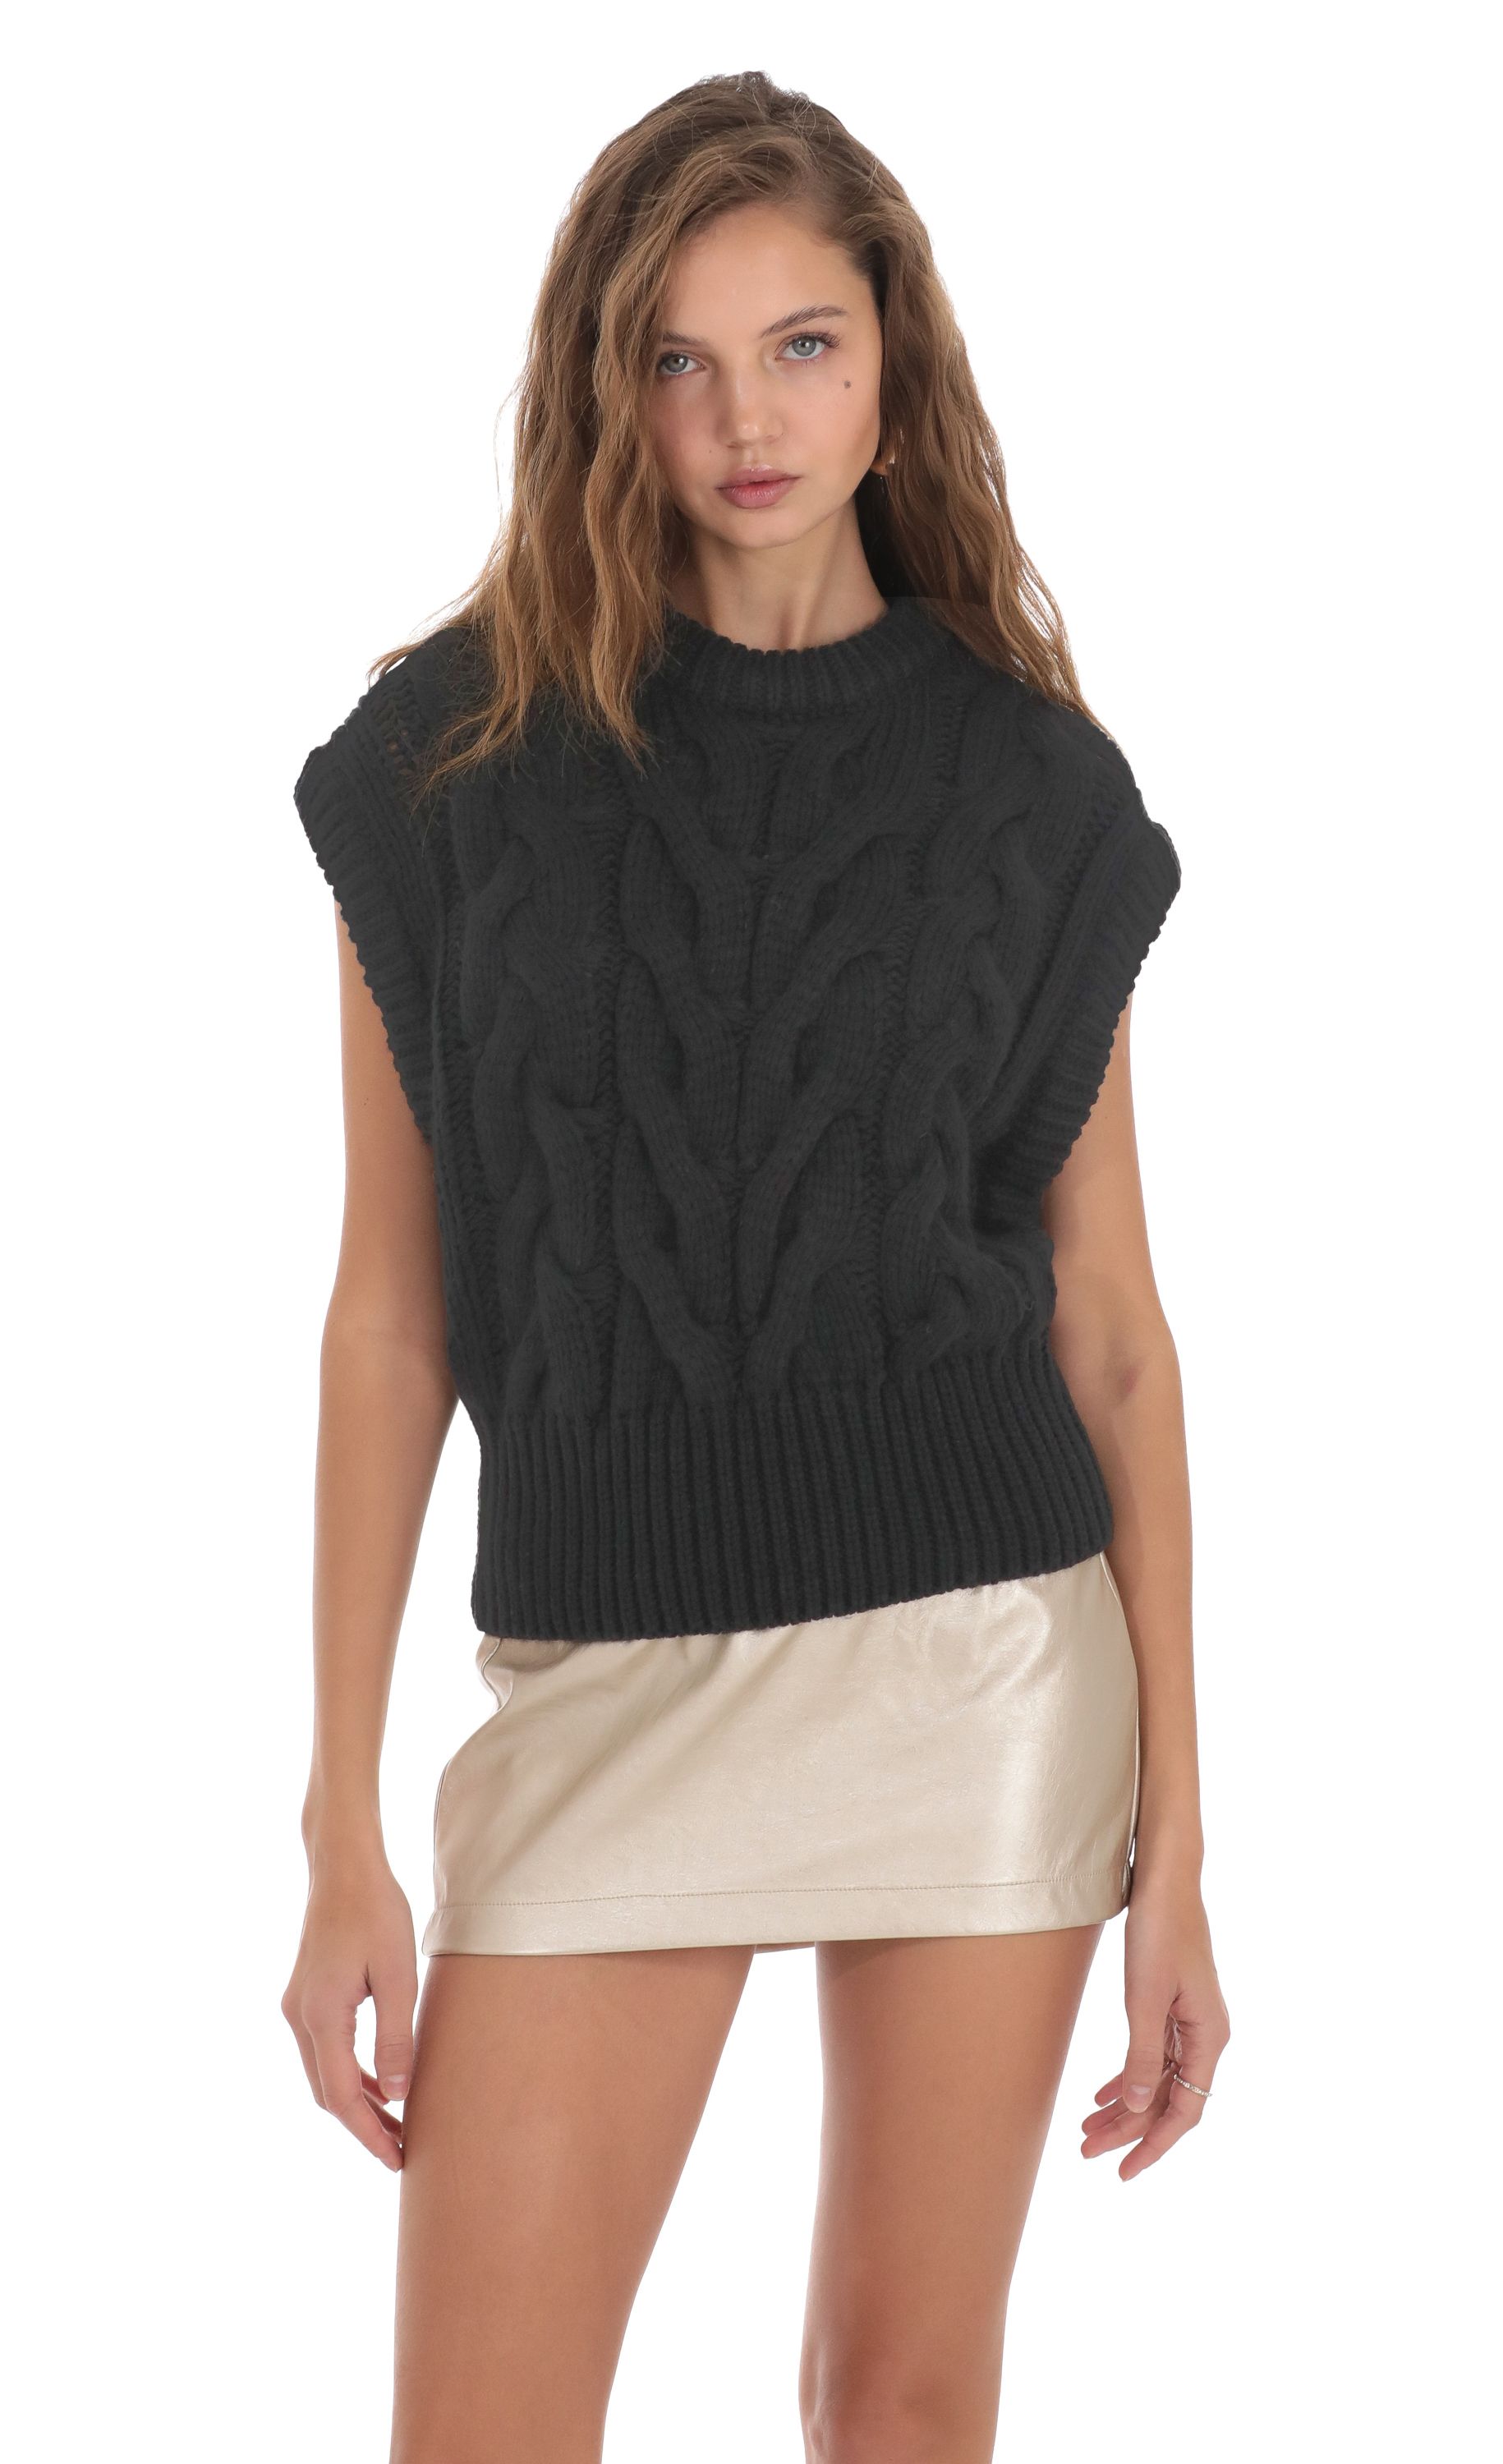 Nhyinnah Chunky Knit Sweater Vest in Black LALAVON